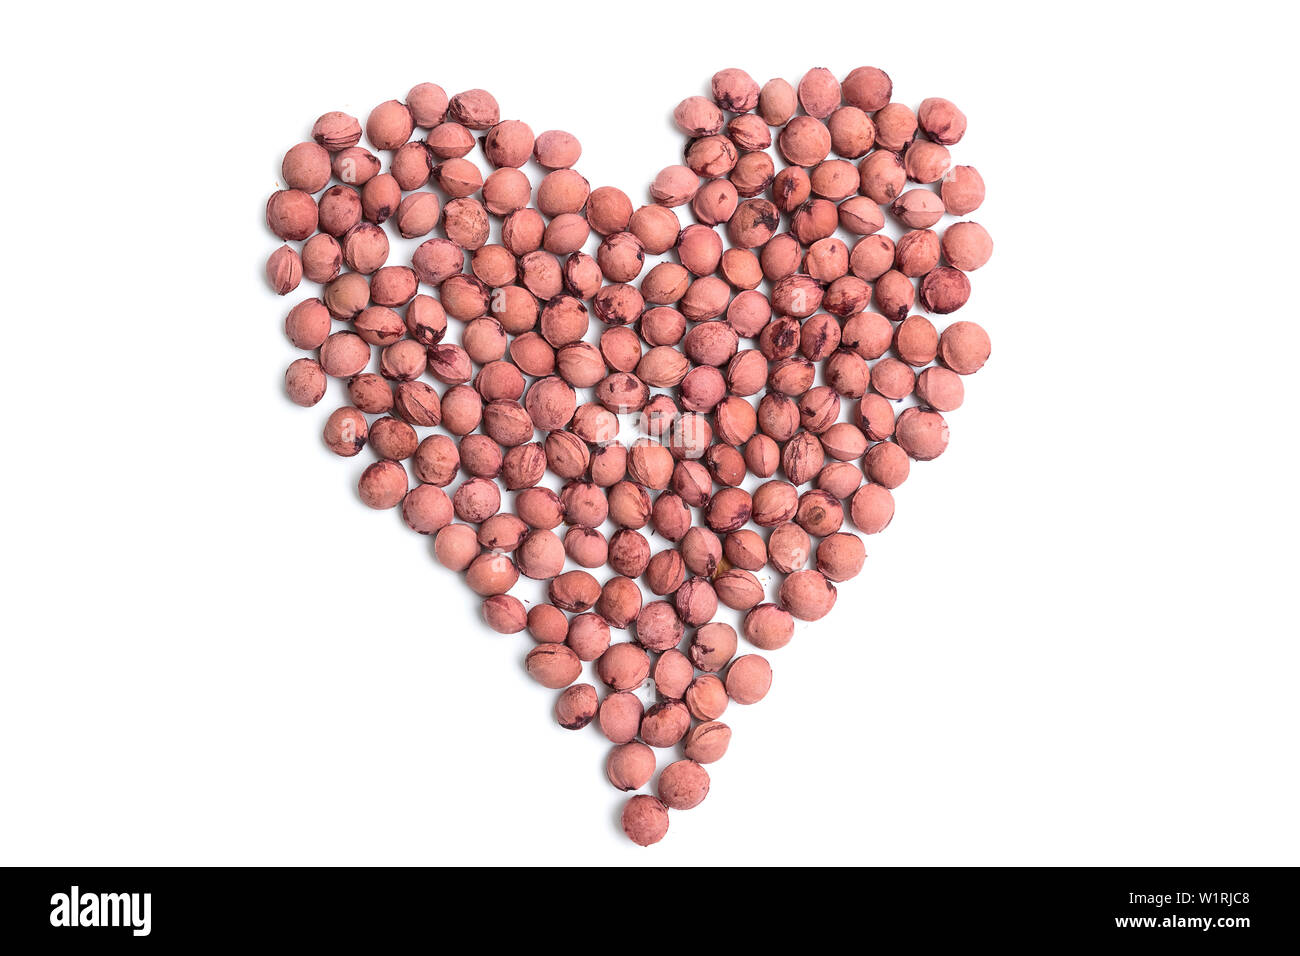 Description: Cherry stones on a white isolated background in the form of a heart Stock Photo